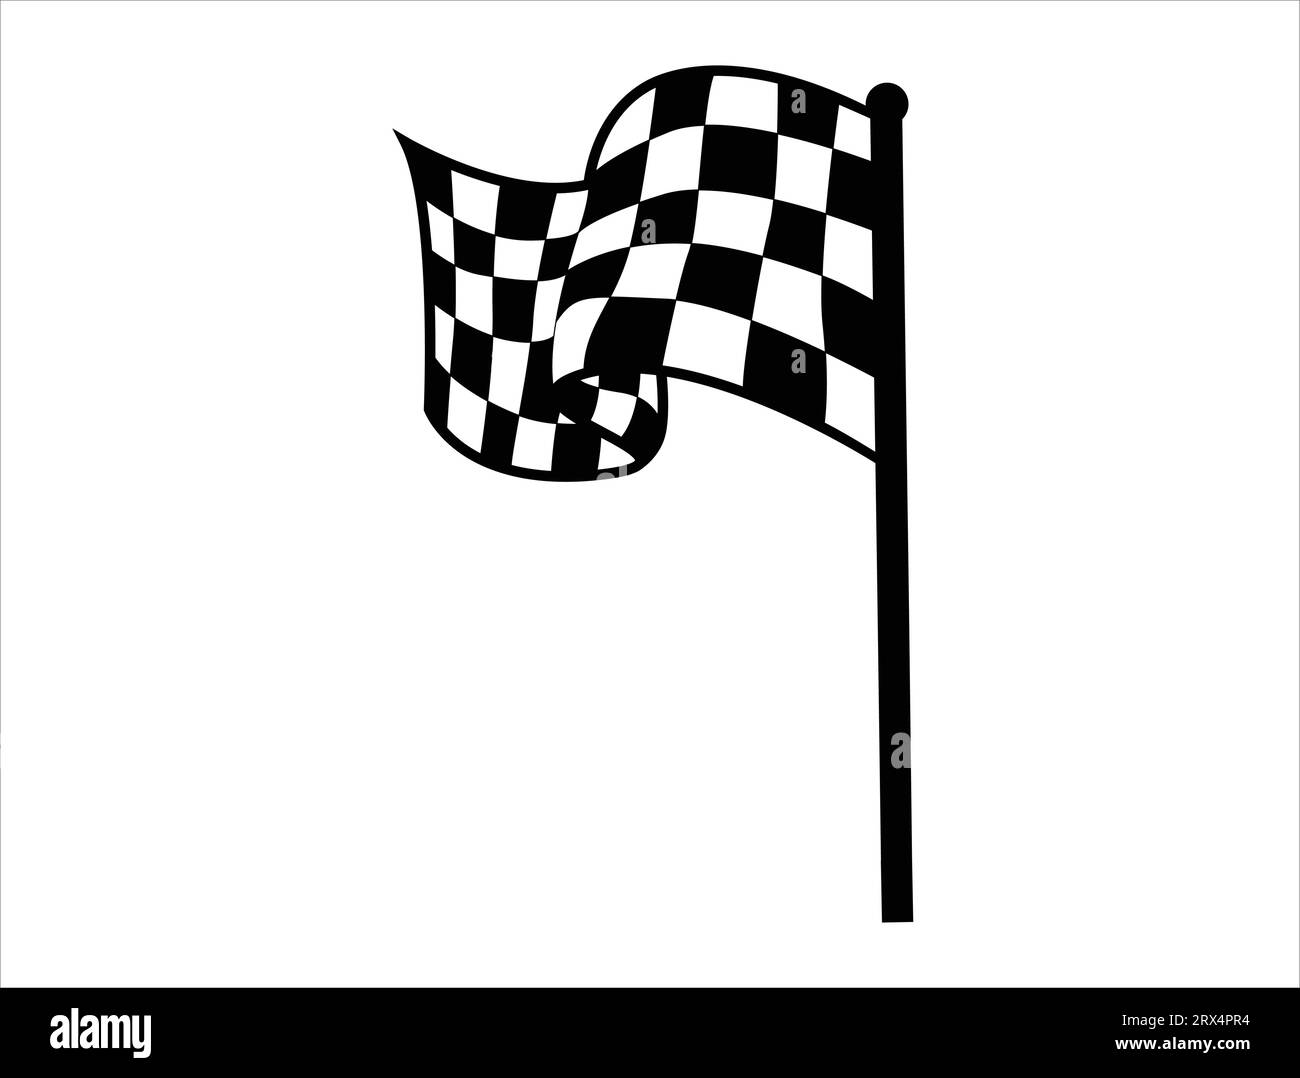 Checkered flag silhouette vector white background Stock Vector Image ...